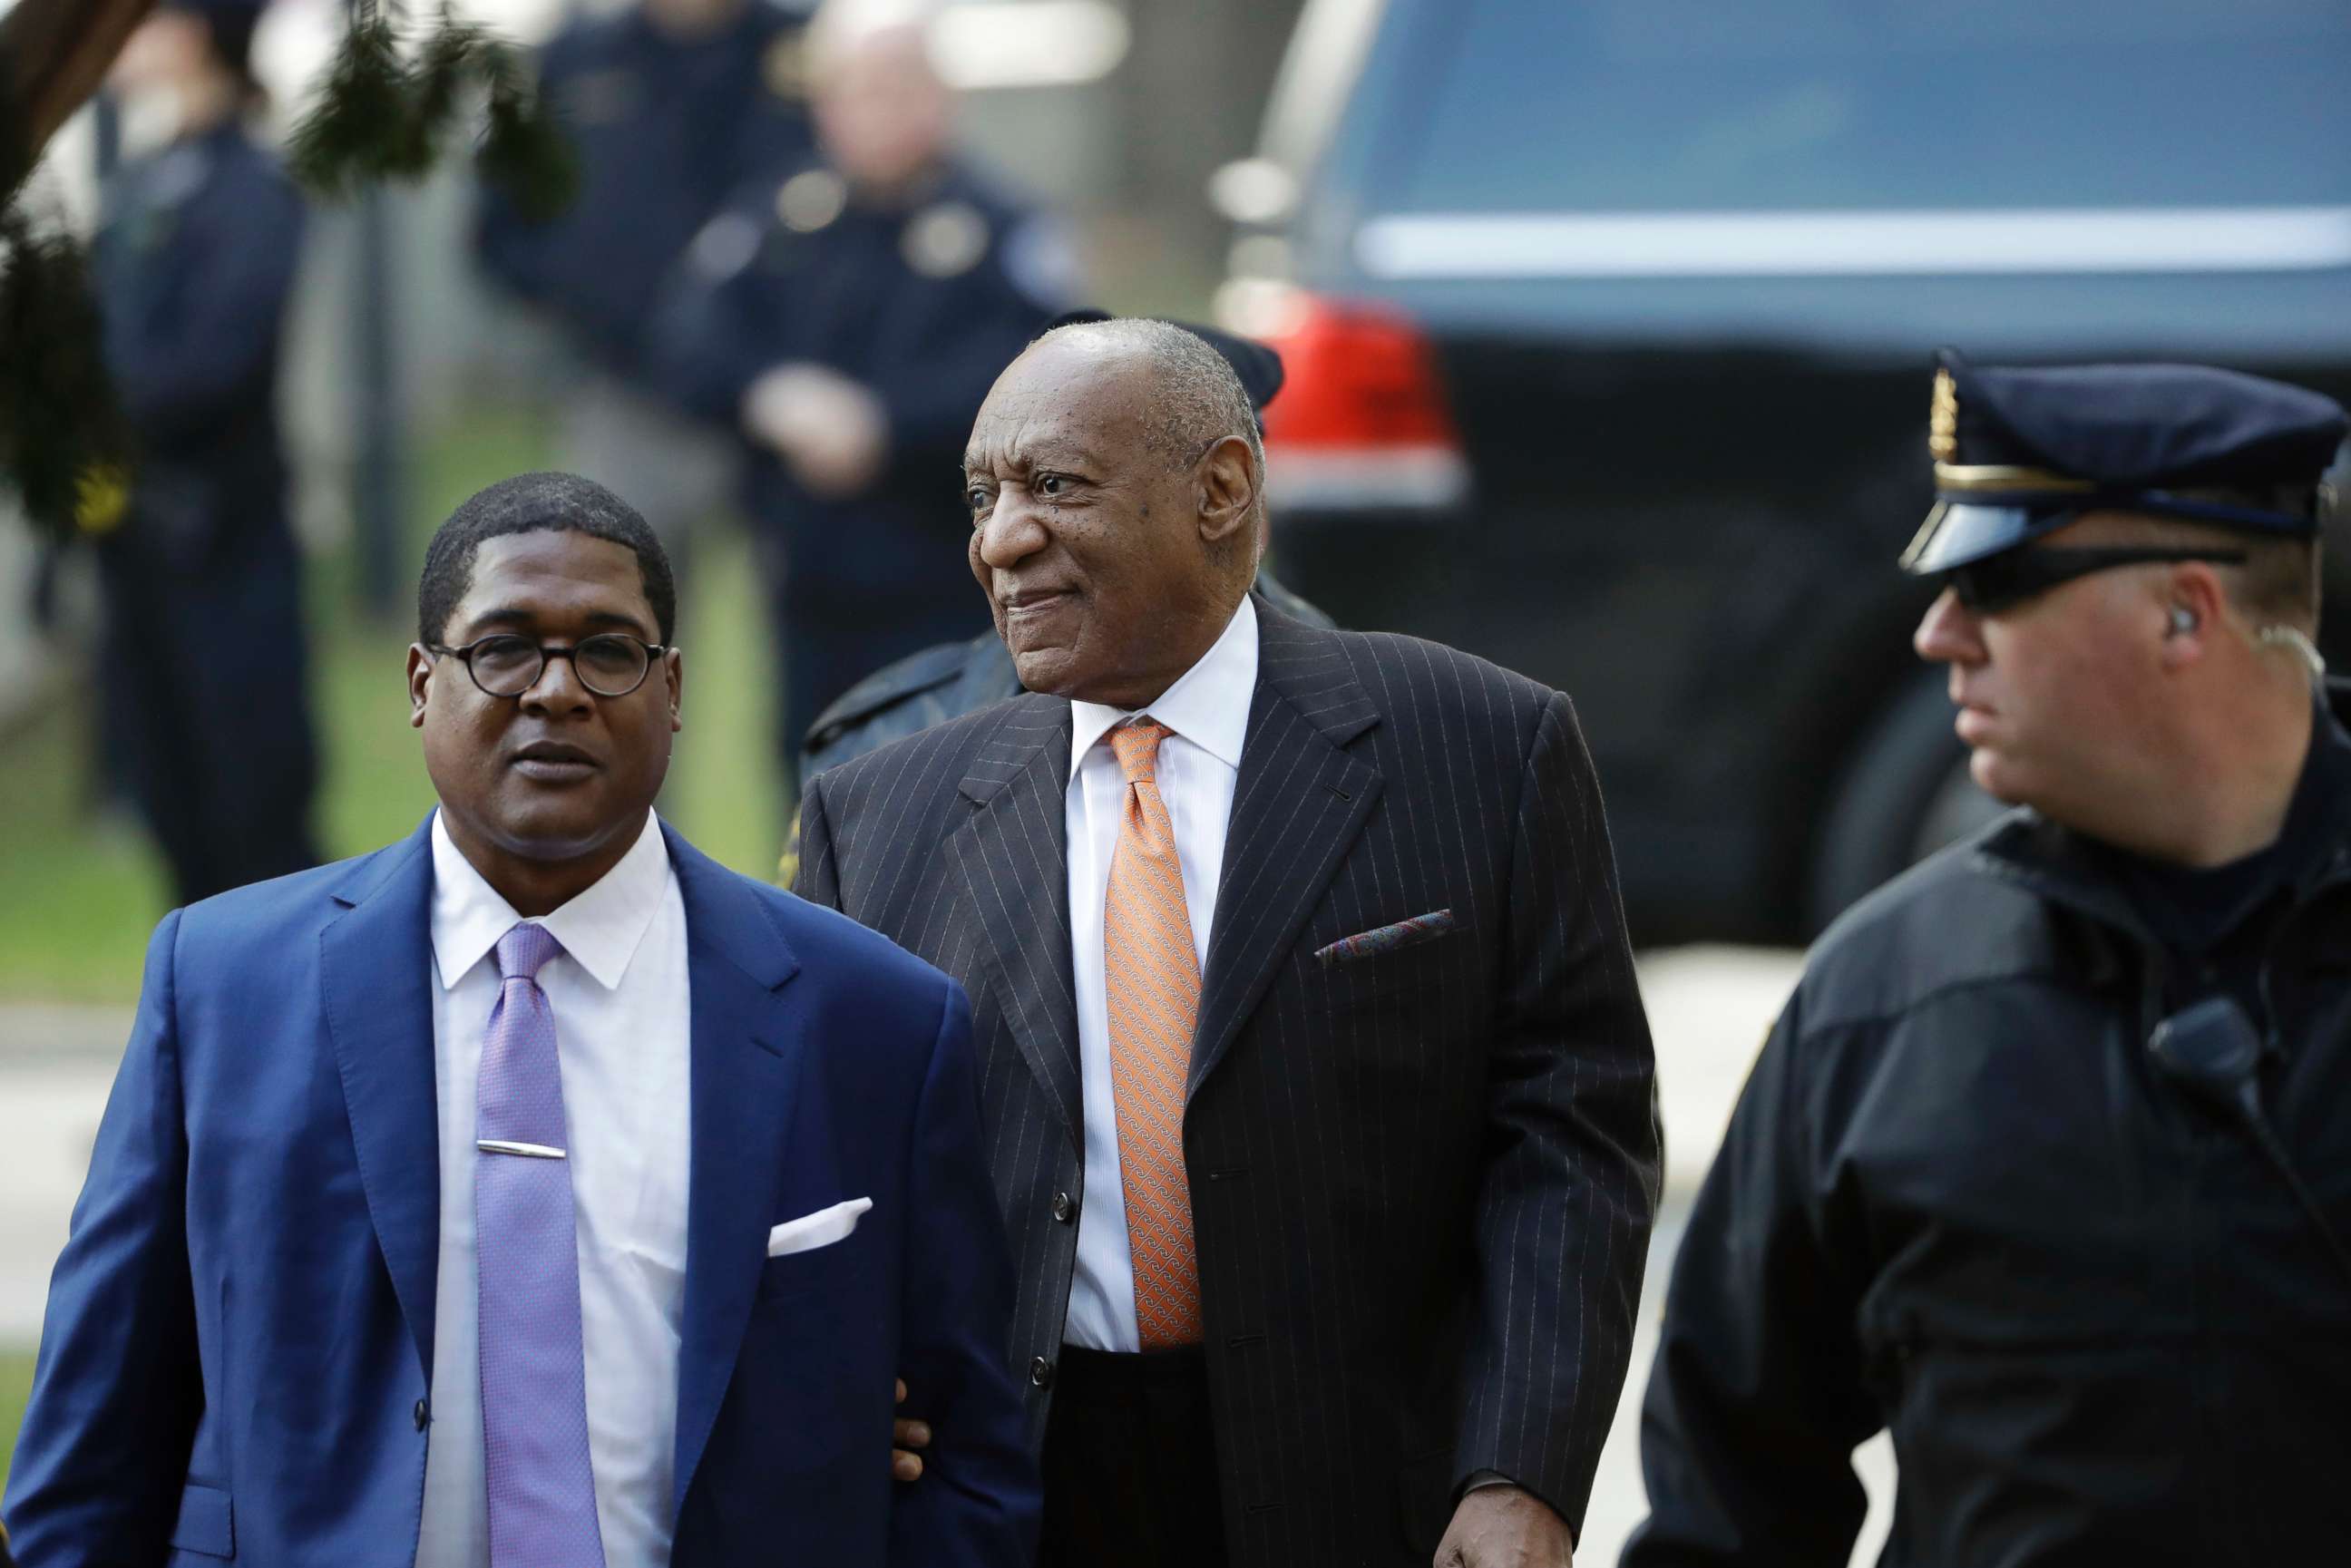 PHOTO: Bill Cosby, center, arrives for his sexual assault trial, April 10, 2018, at the Montgomery County Courthouse in Norristown, Pa.